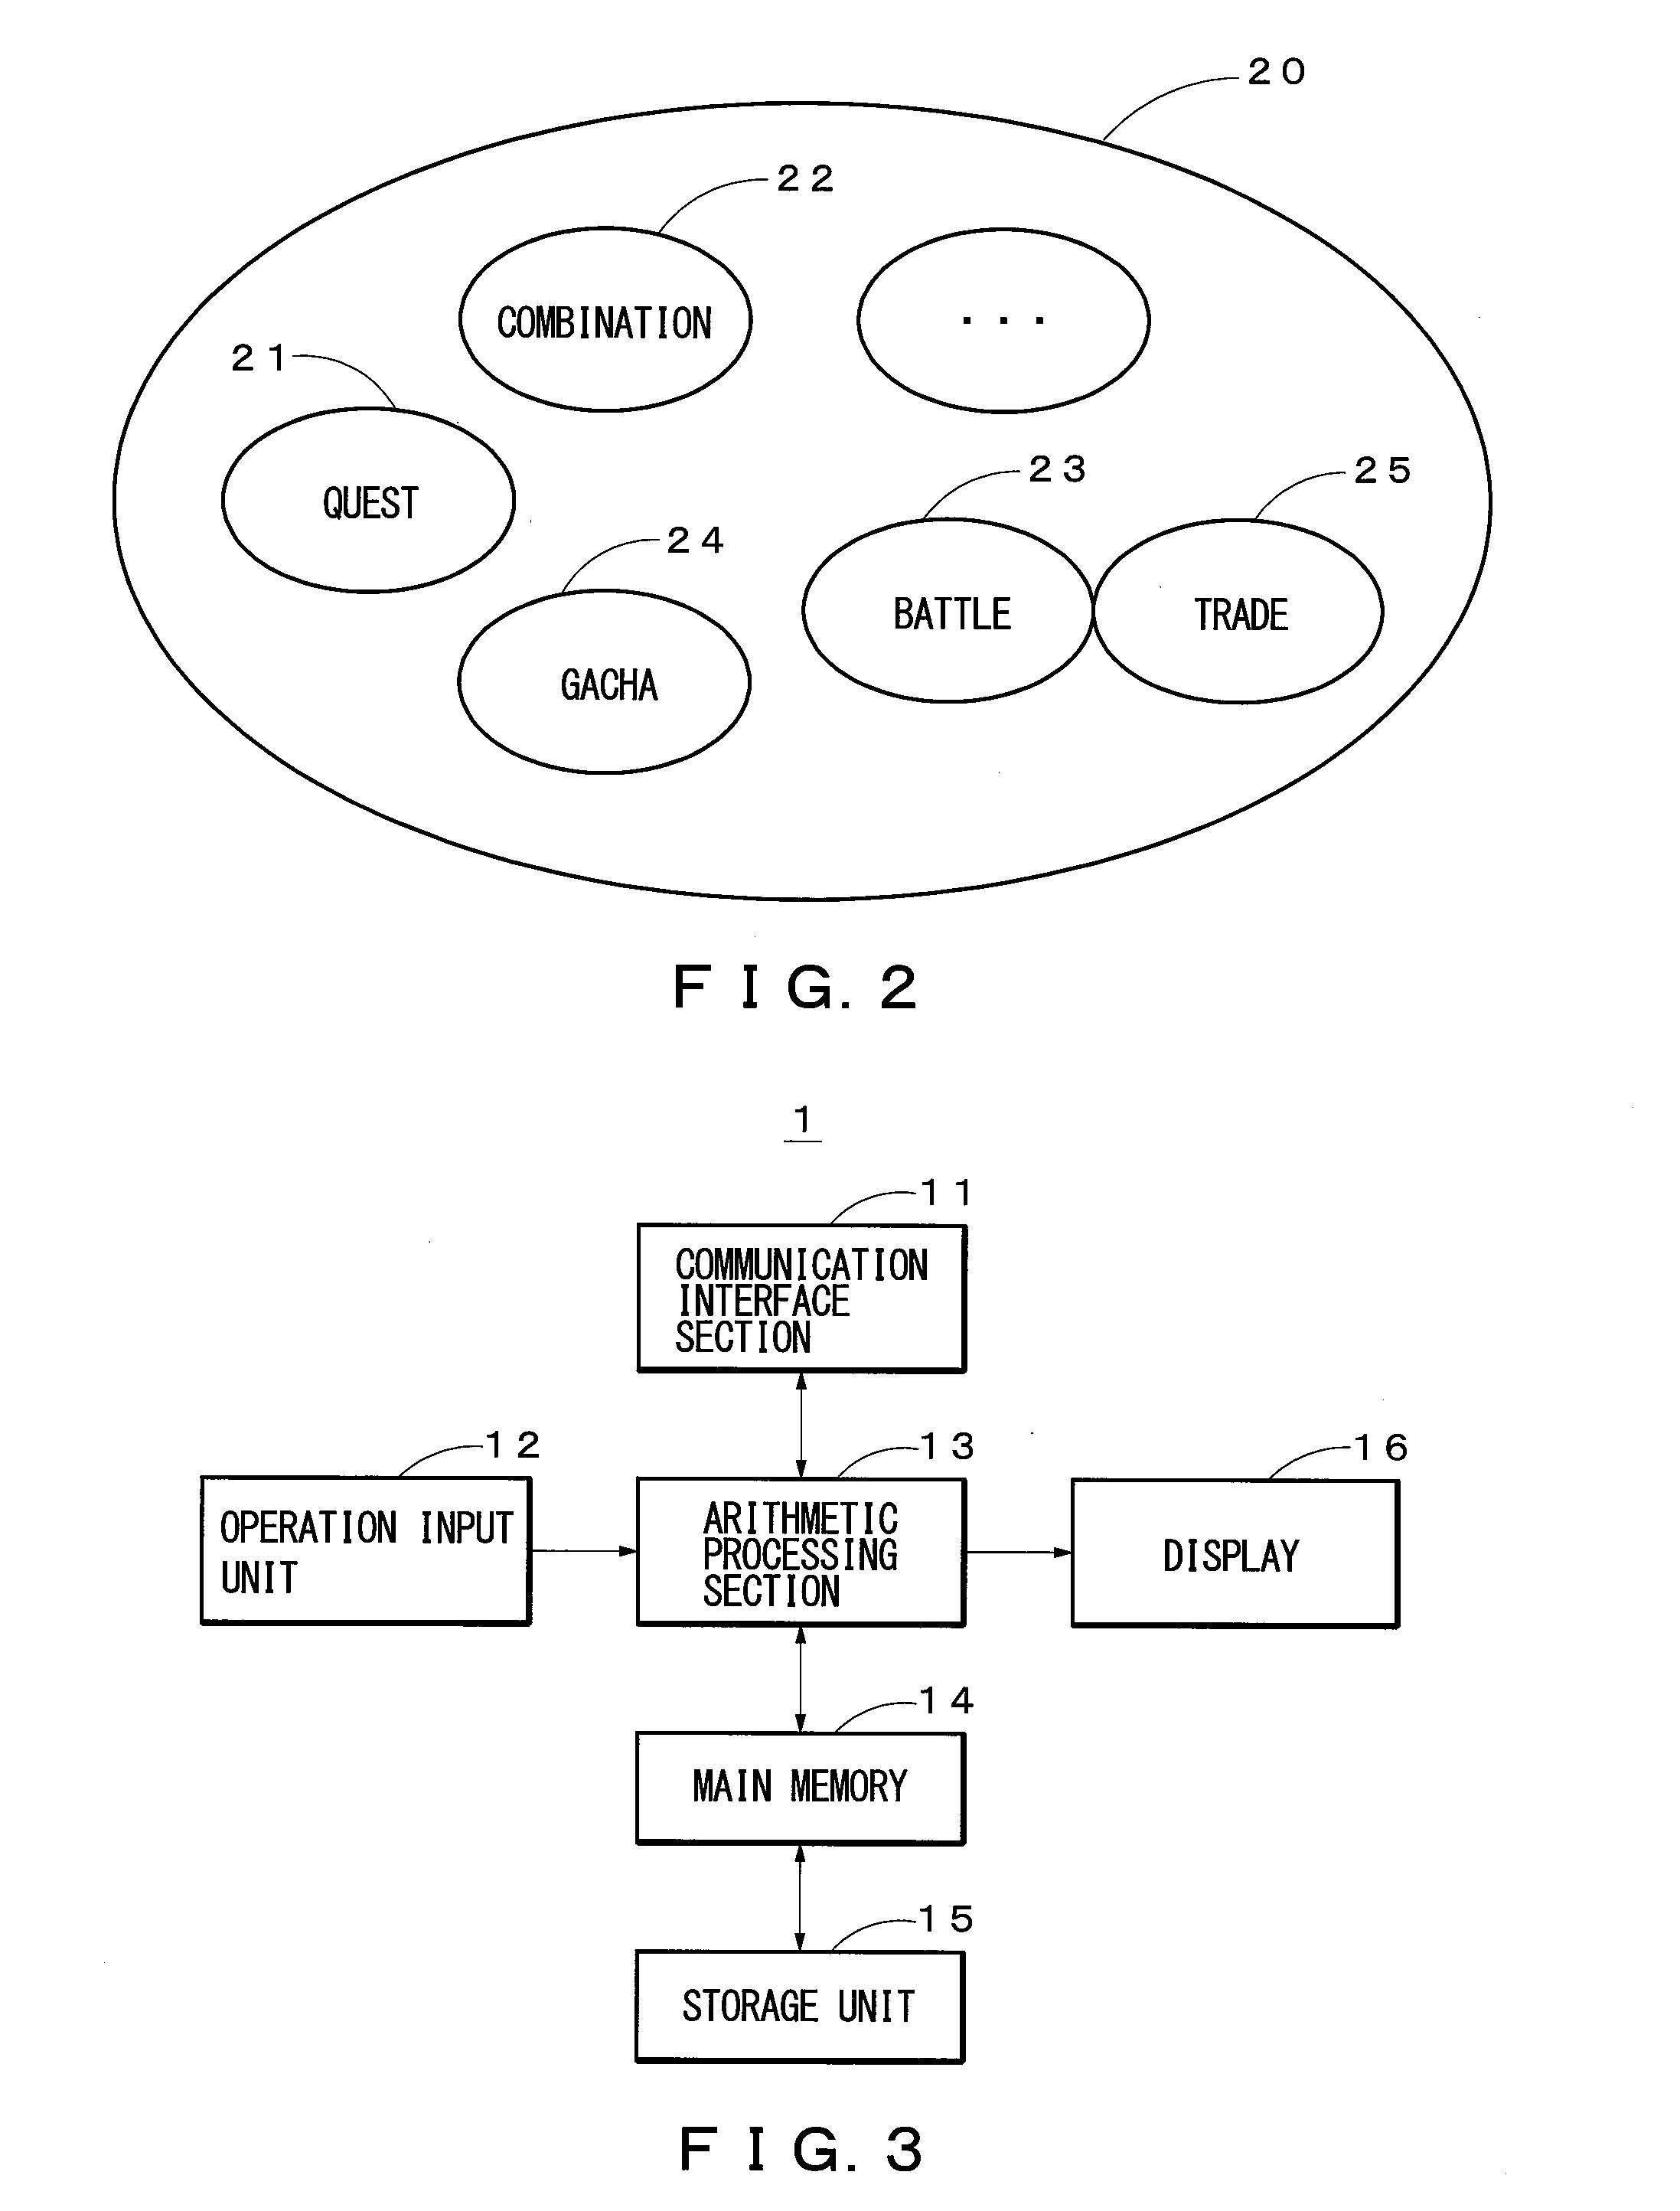 Game server, game controlling method thereof, game system, and non-transitory computer-readable medium